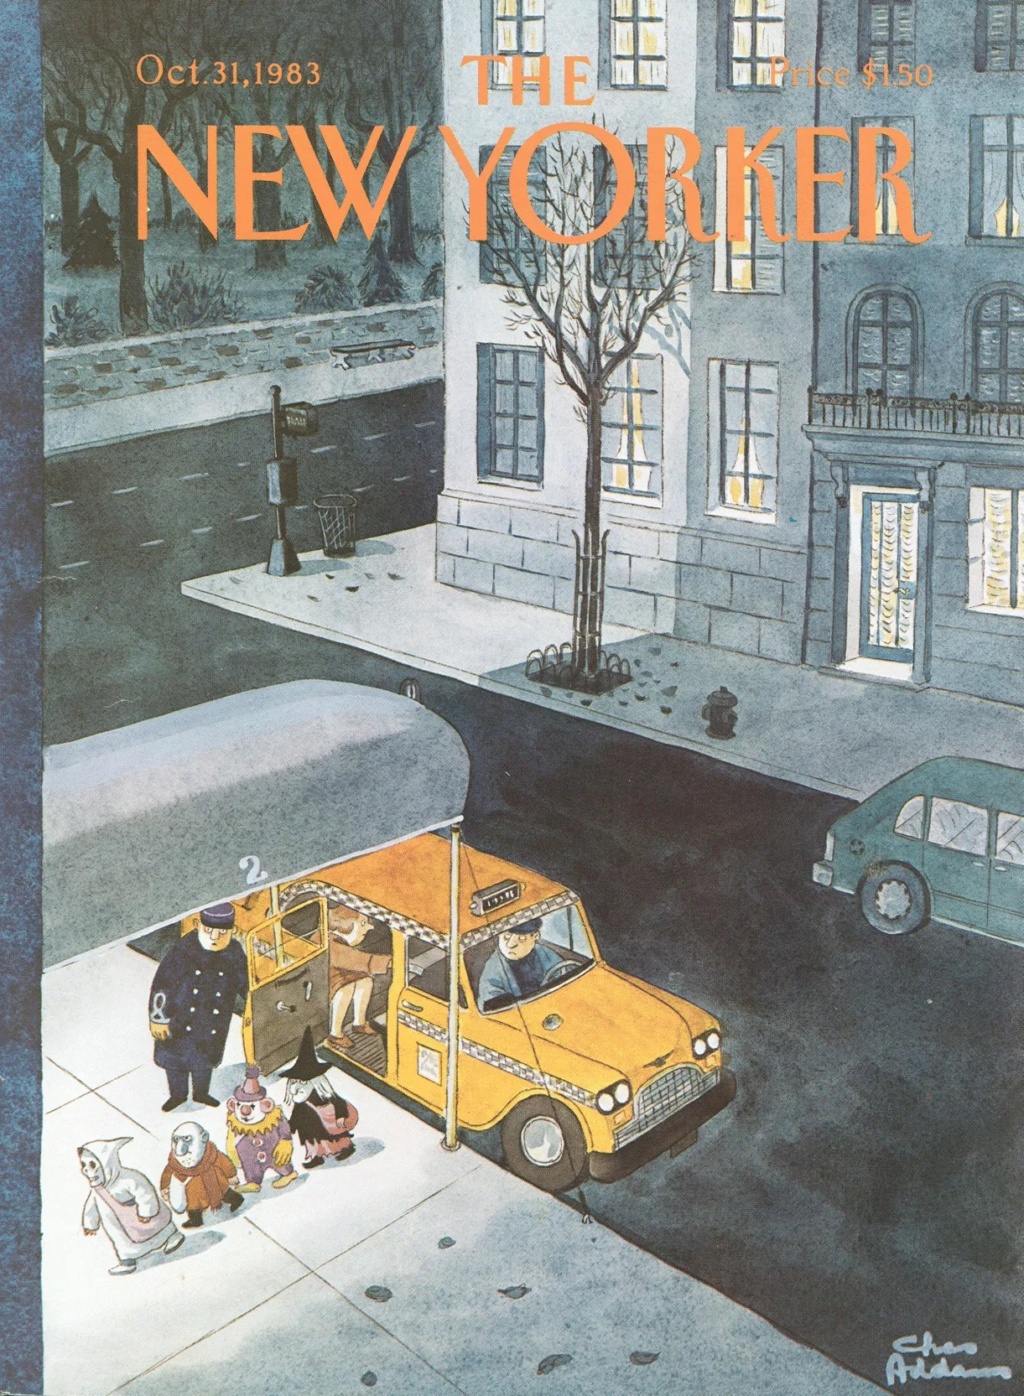 The New Yorker : Les couvertures - Page 2 Hallow13